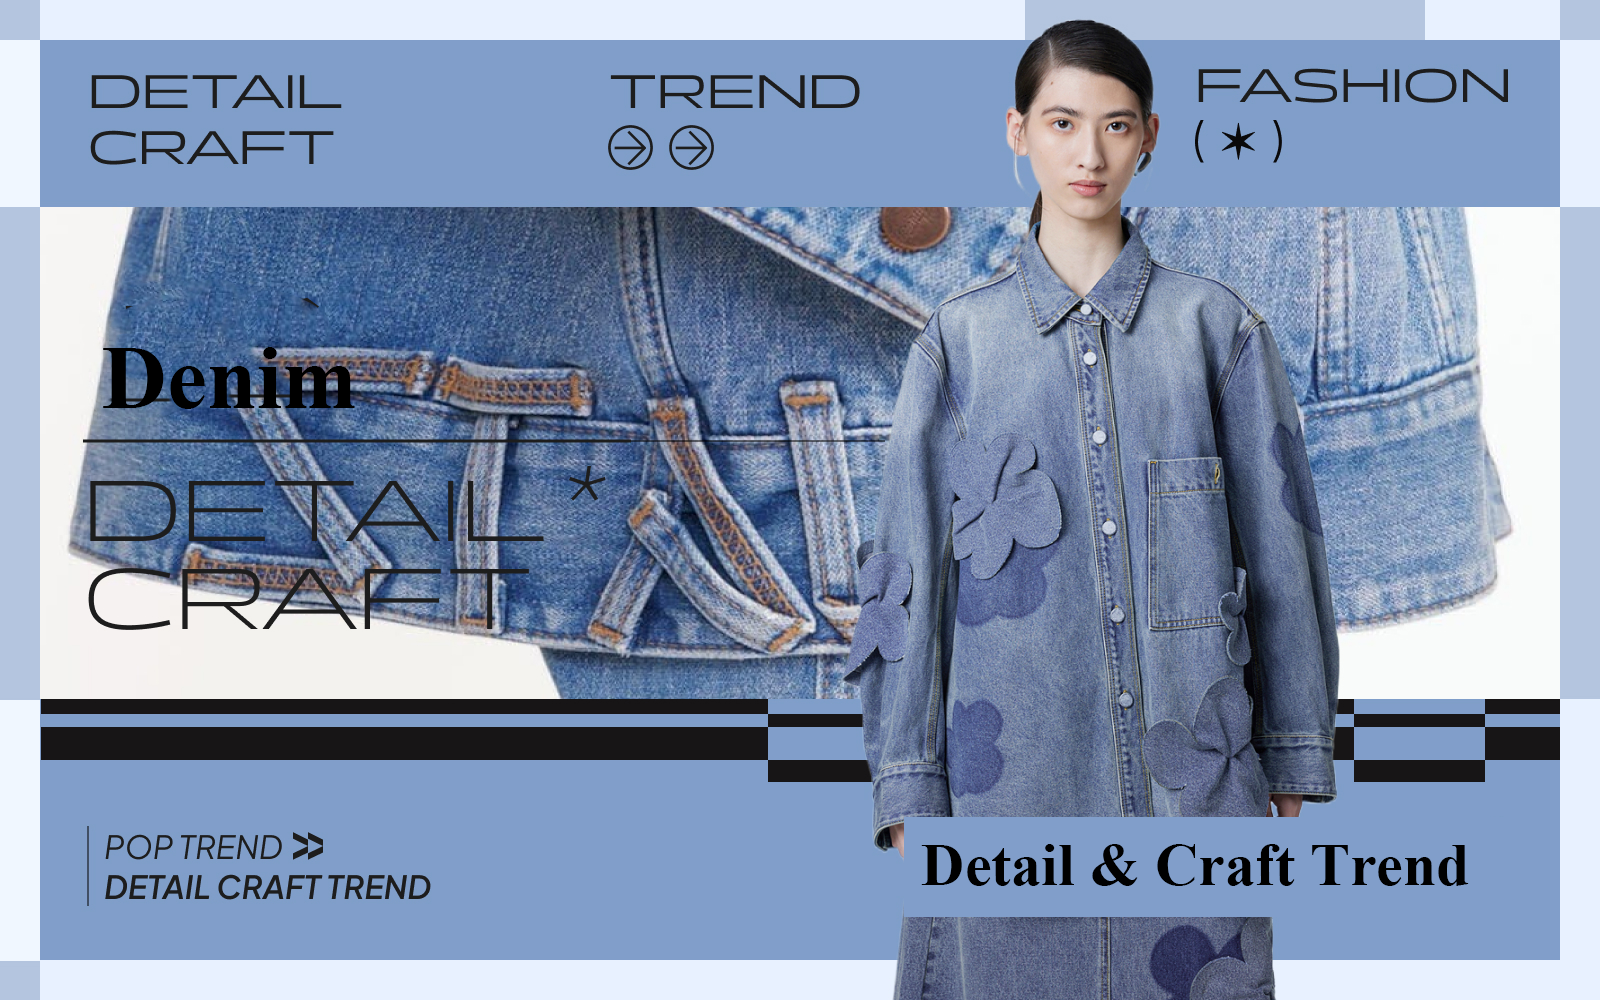 Smart Structuring -- The Detail & Craft Trend for Denim